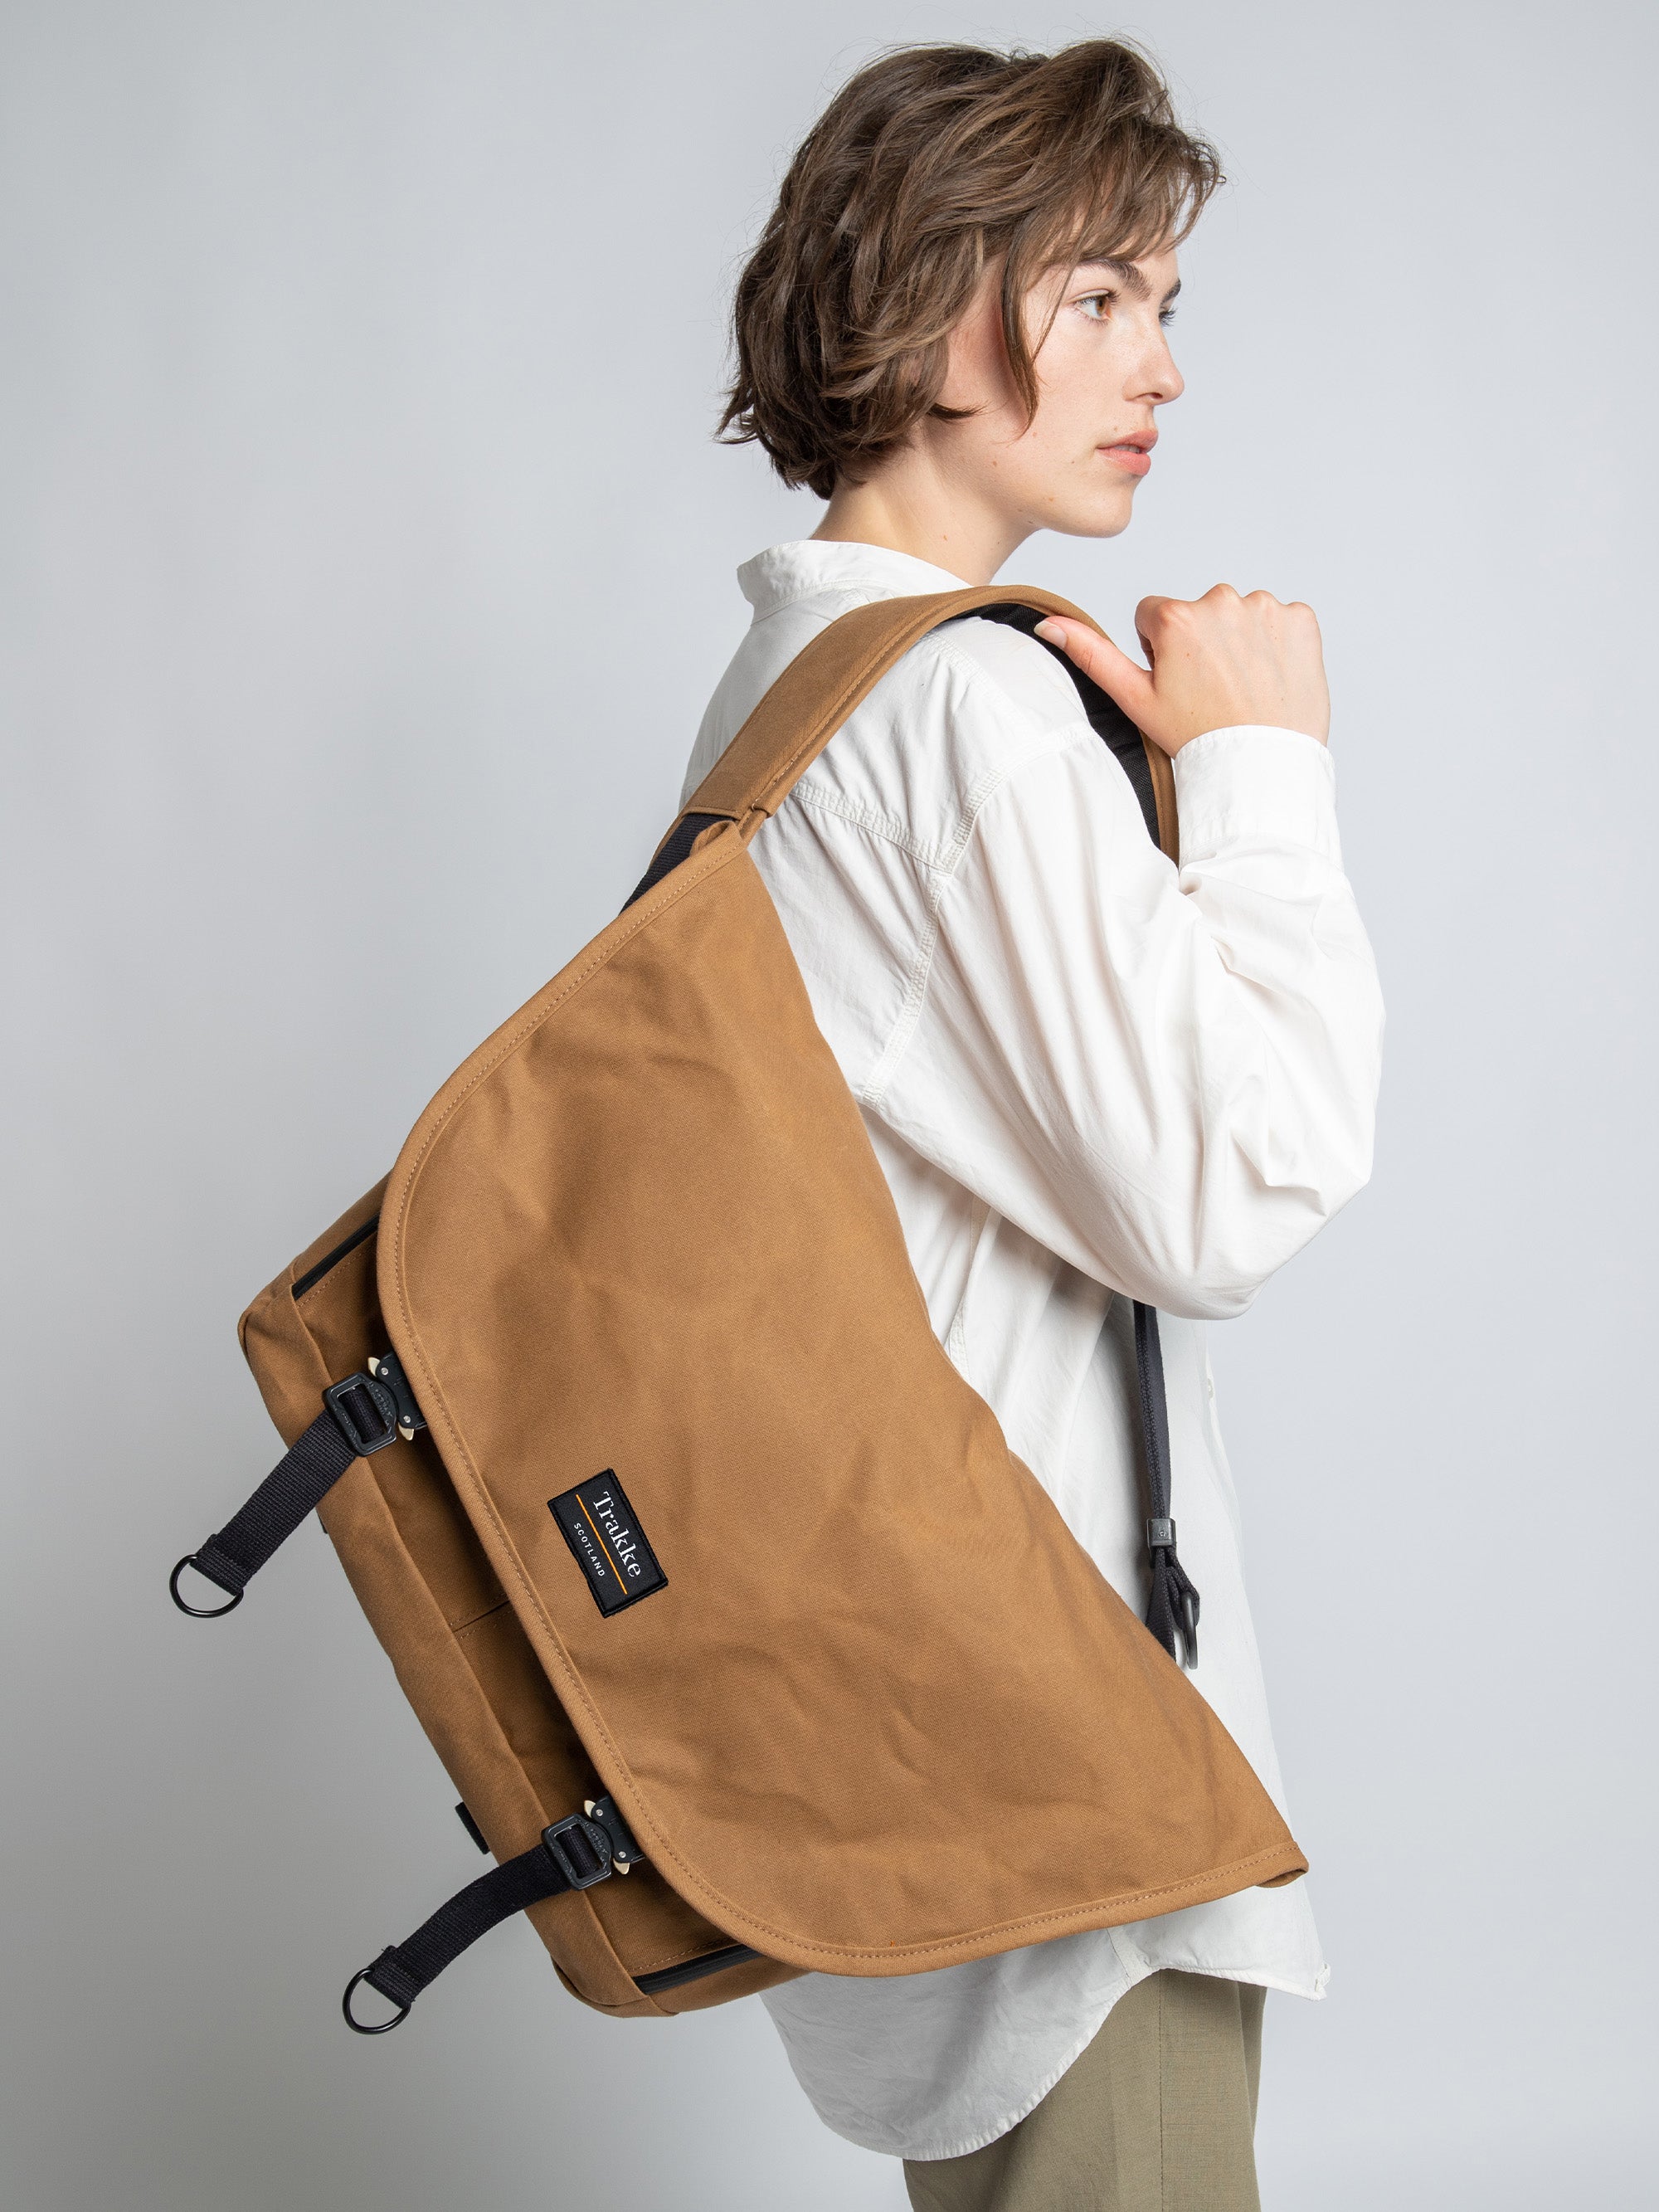 Trakke hand make their bags and will repair them for free for life :  r/BuyItForLife